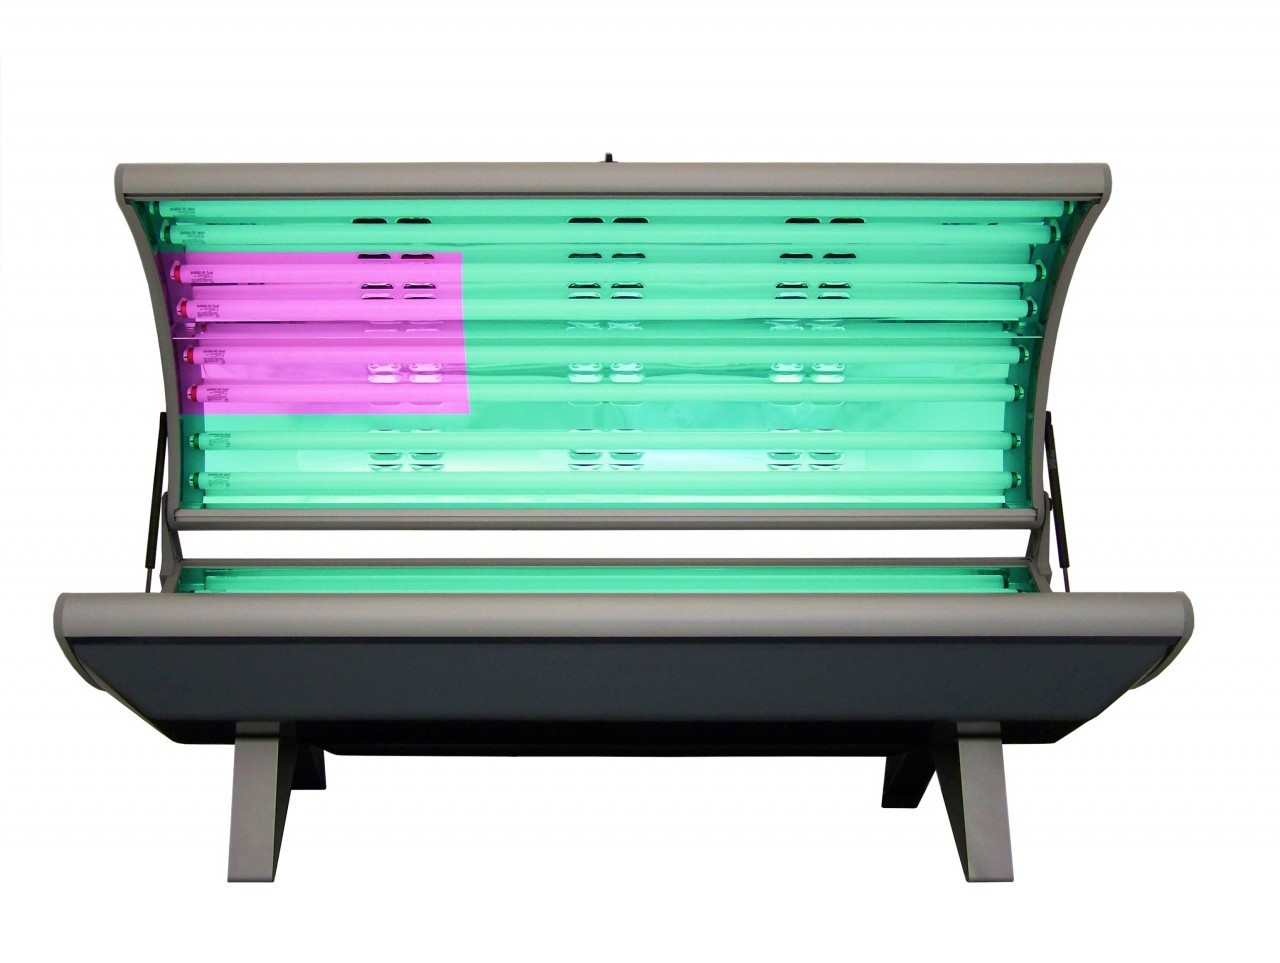 Esb Elite 16f Tanning Bed, How To Use A Canopy Tanning Bed